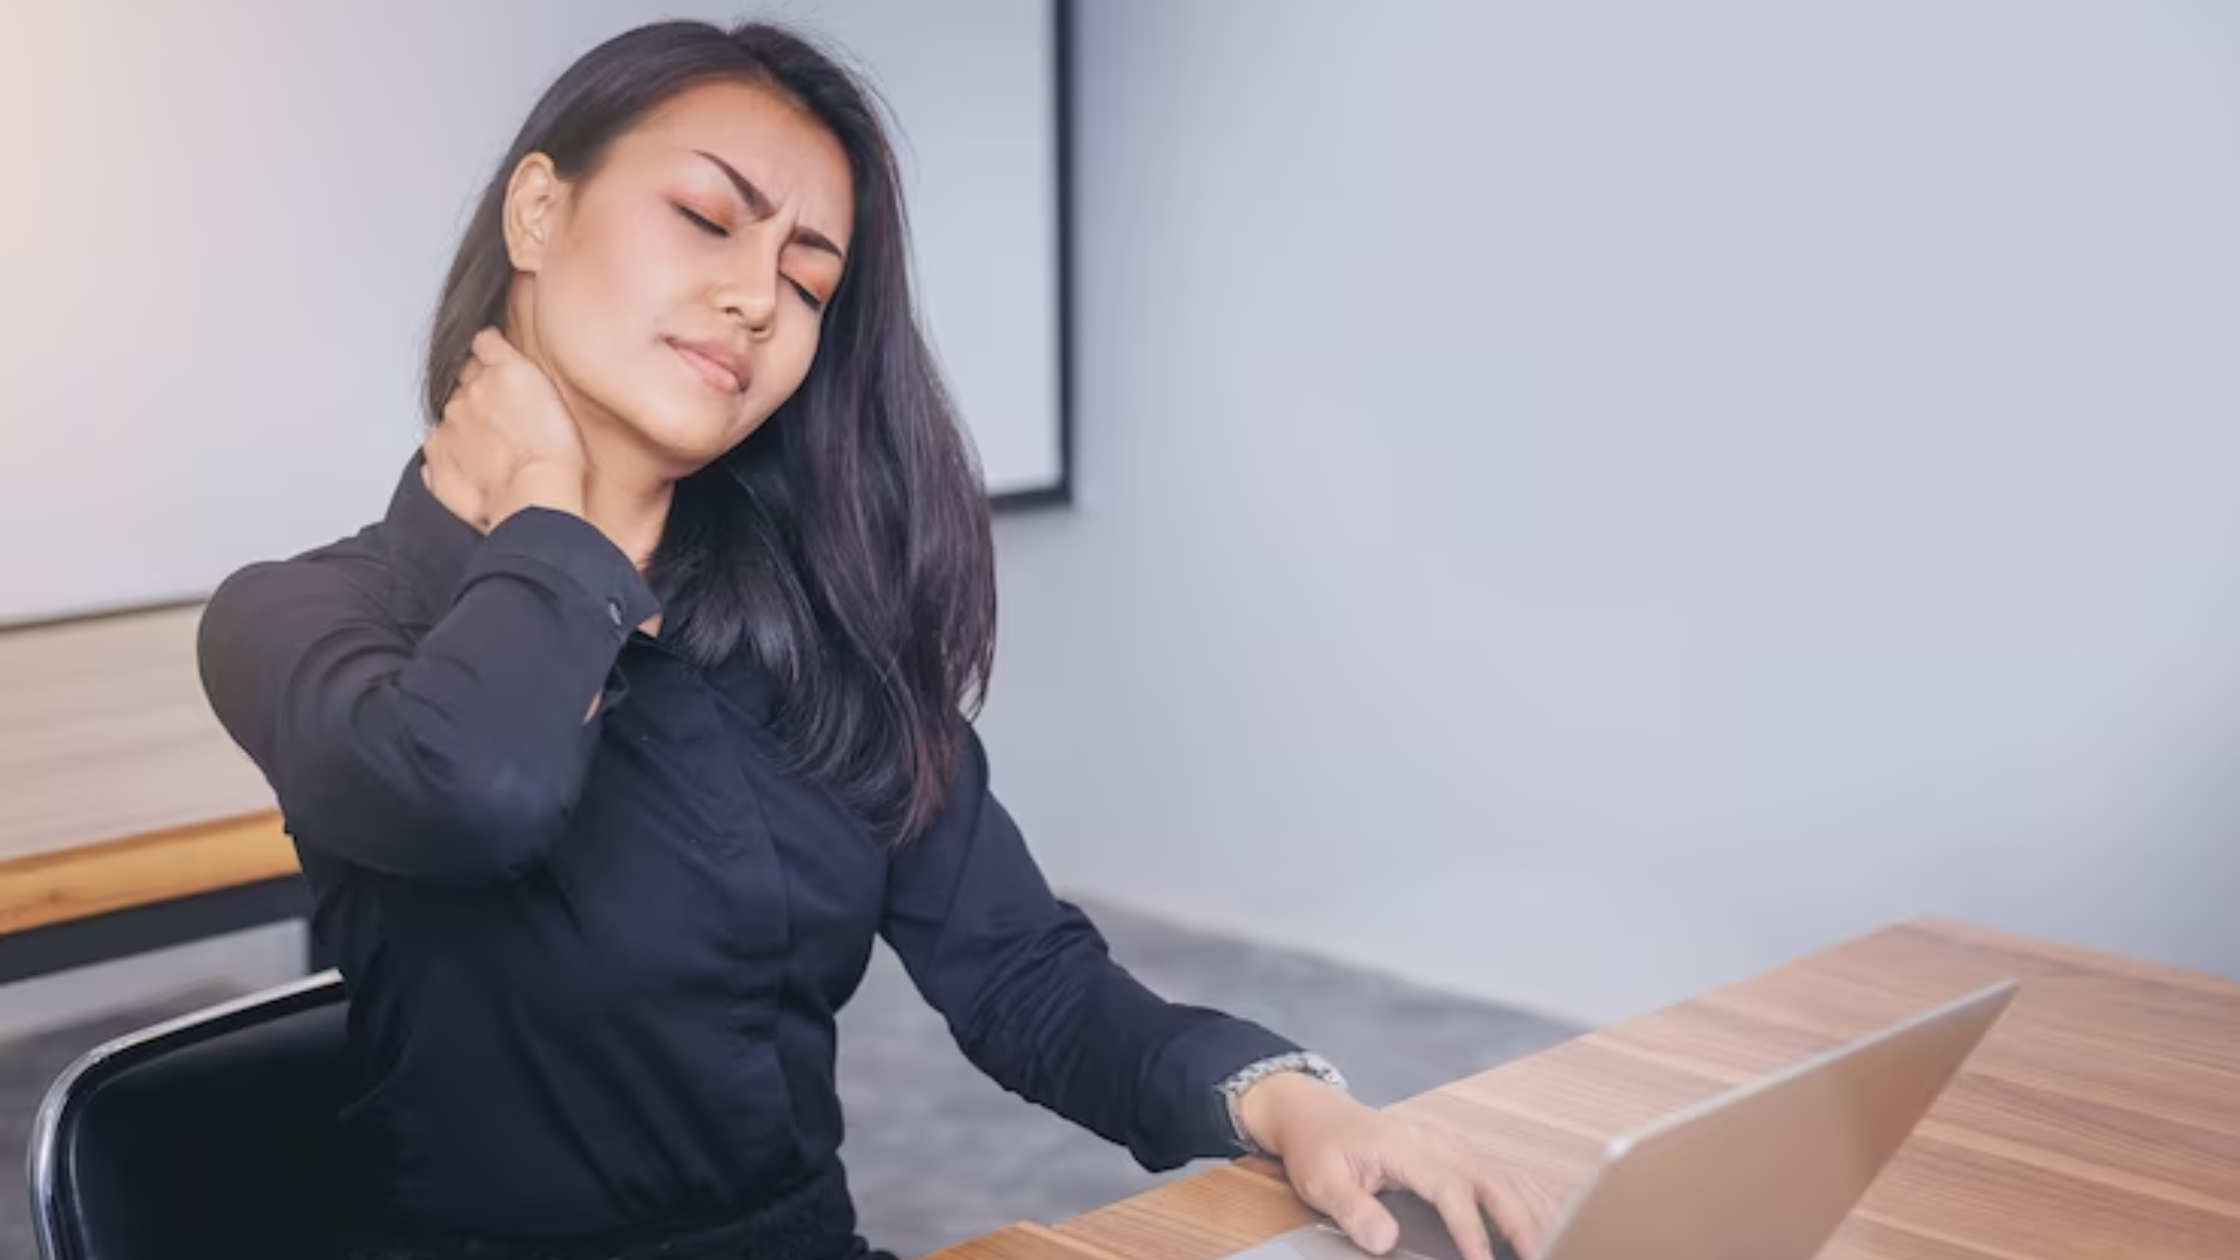 Discover the Benefits of Physical Therapy in Relieving Neck Pain - Digital Marketing